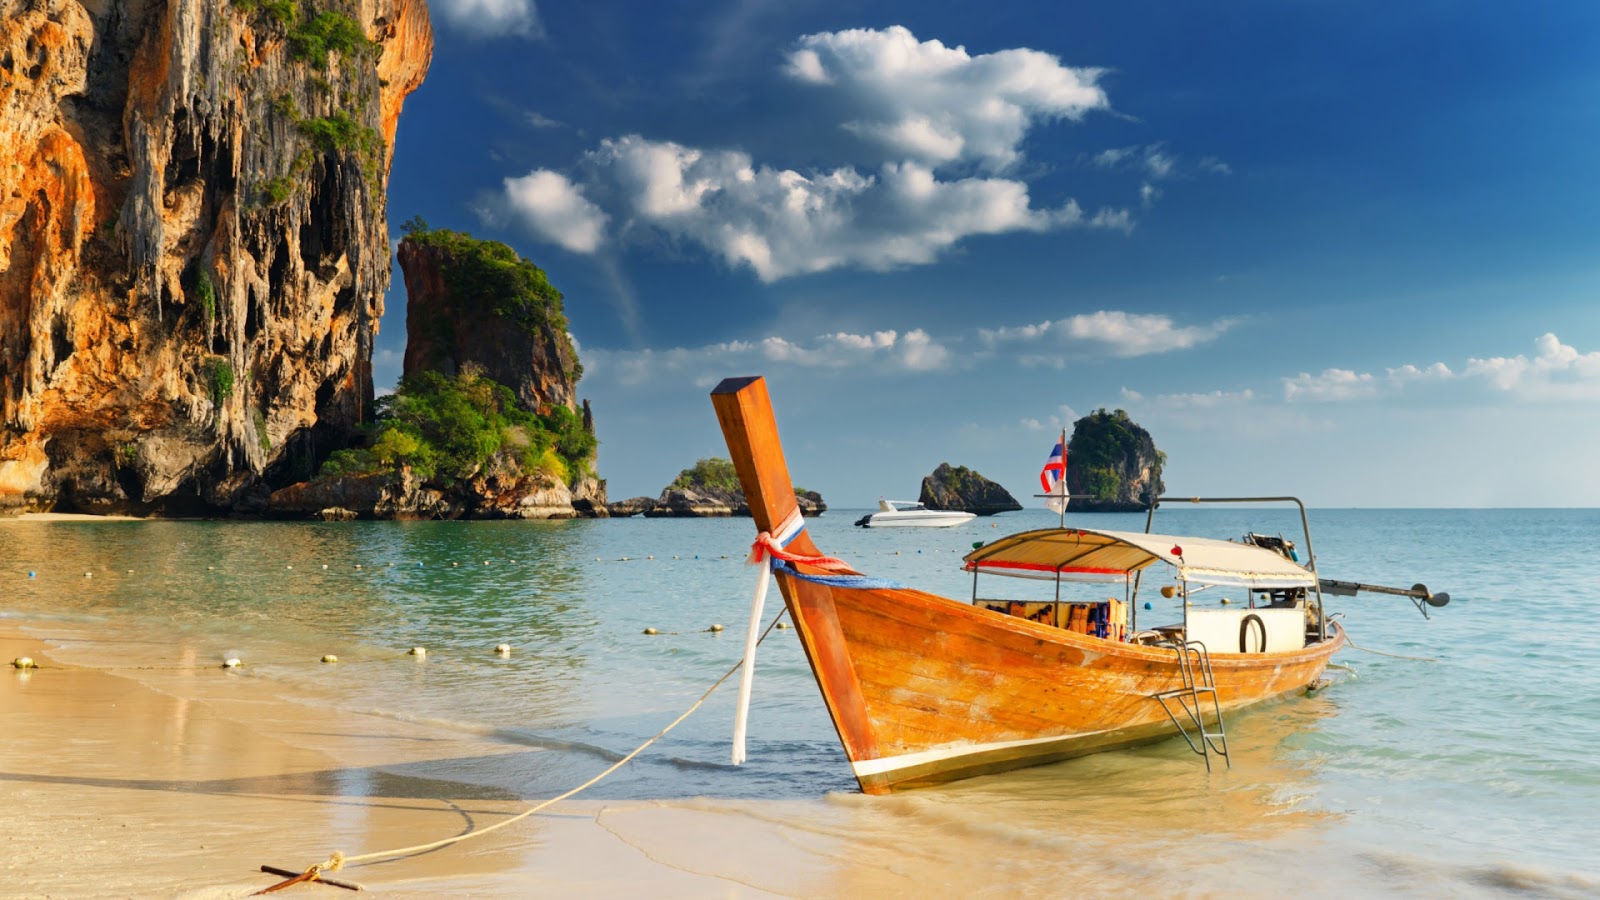 Somewhere In Thailand HD Wallpaper For Desktop And Mac